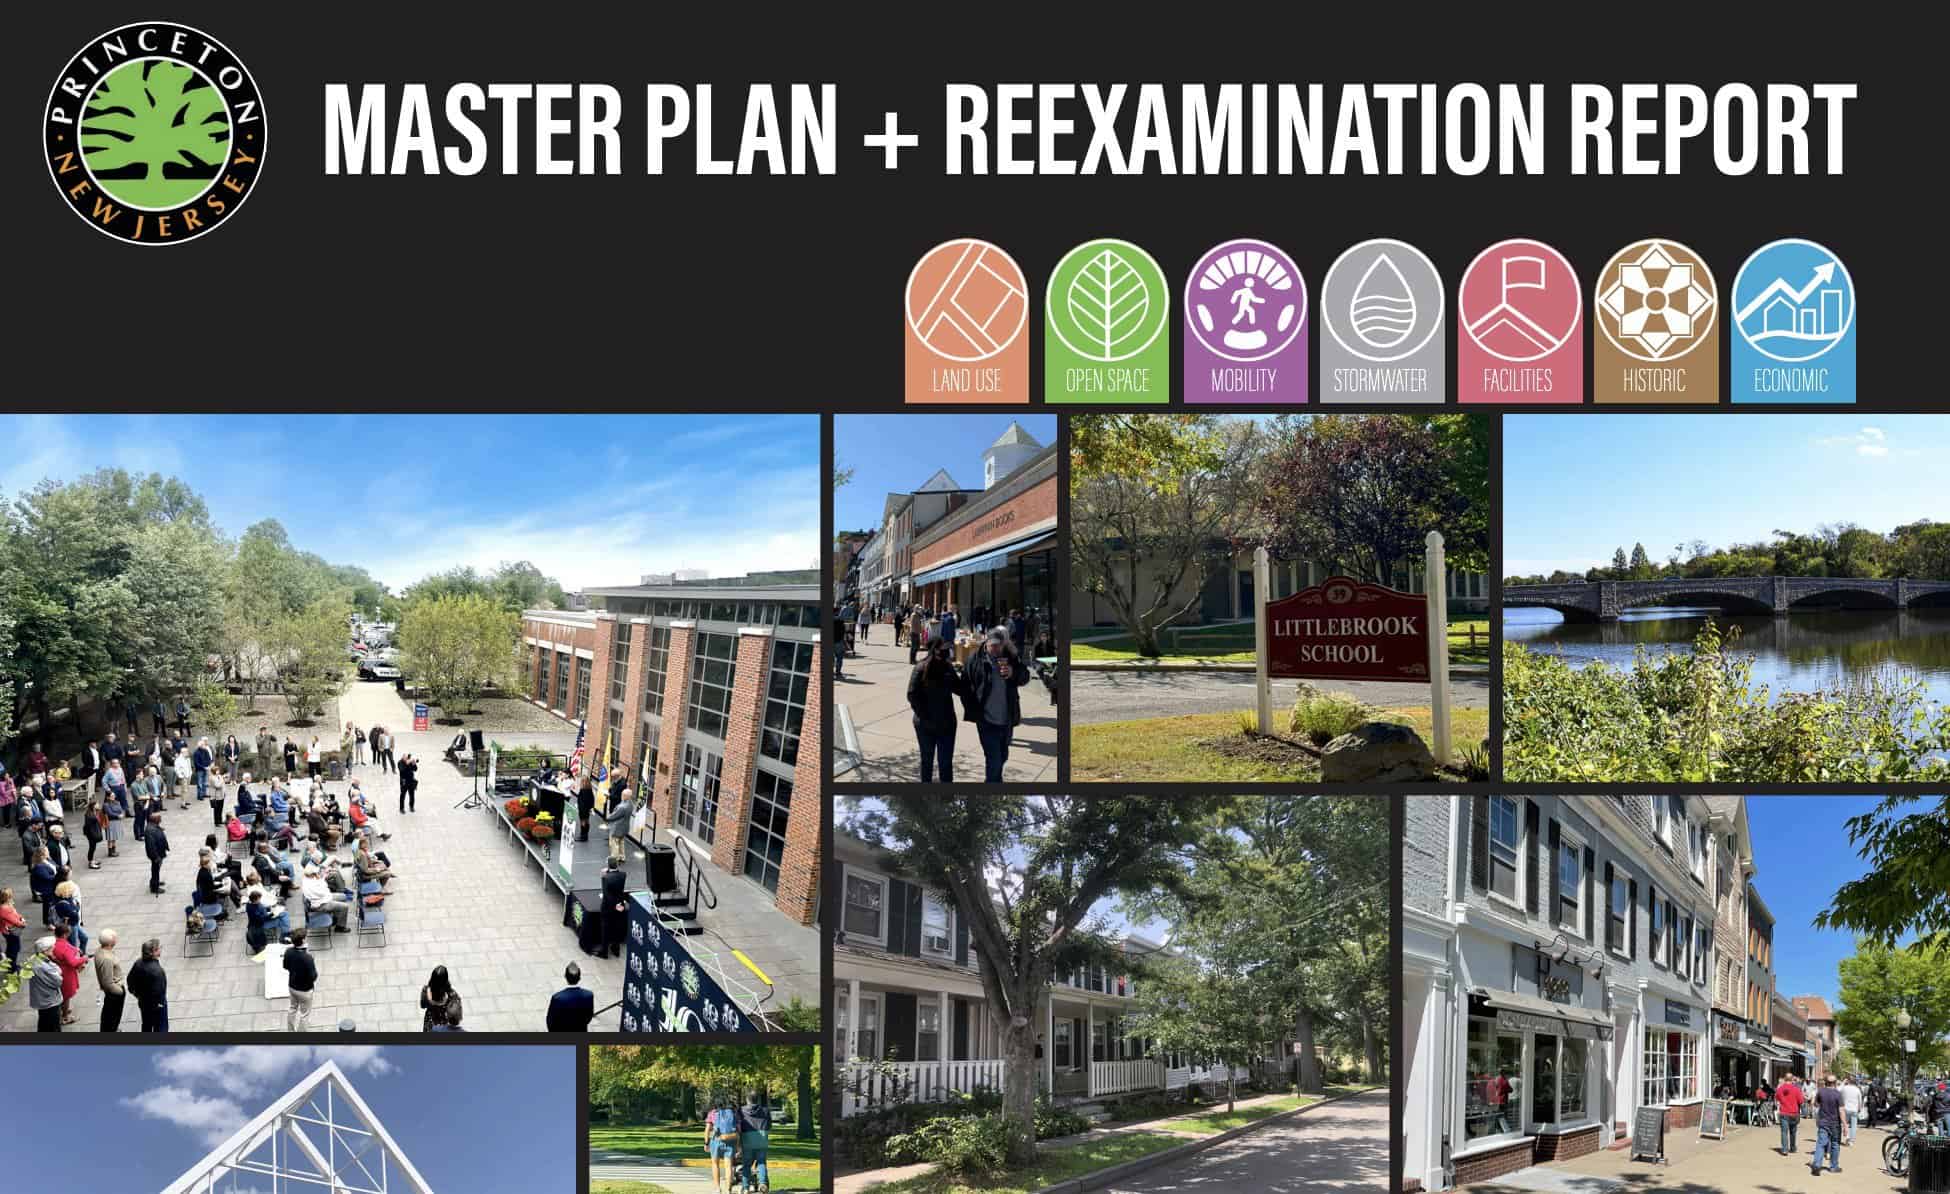 Princeton Planning Board votes unanimously to approve new Master Plan